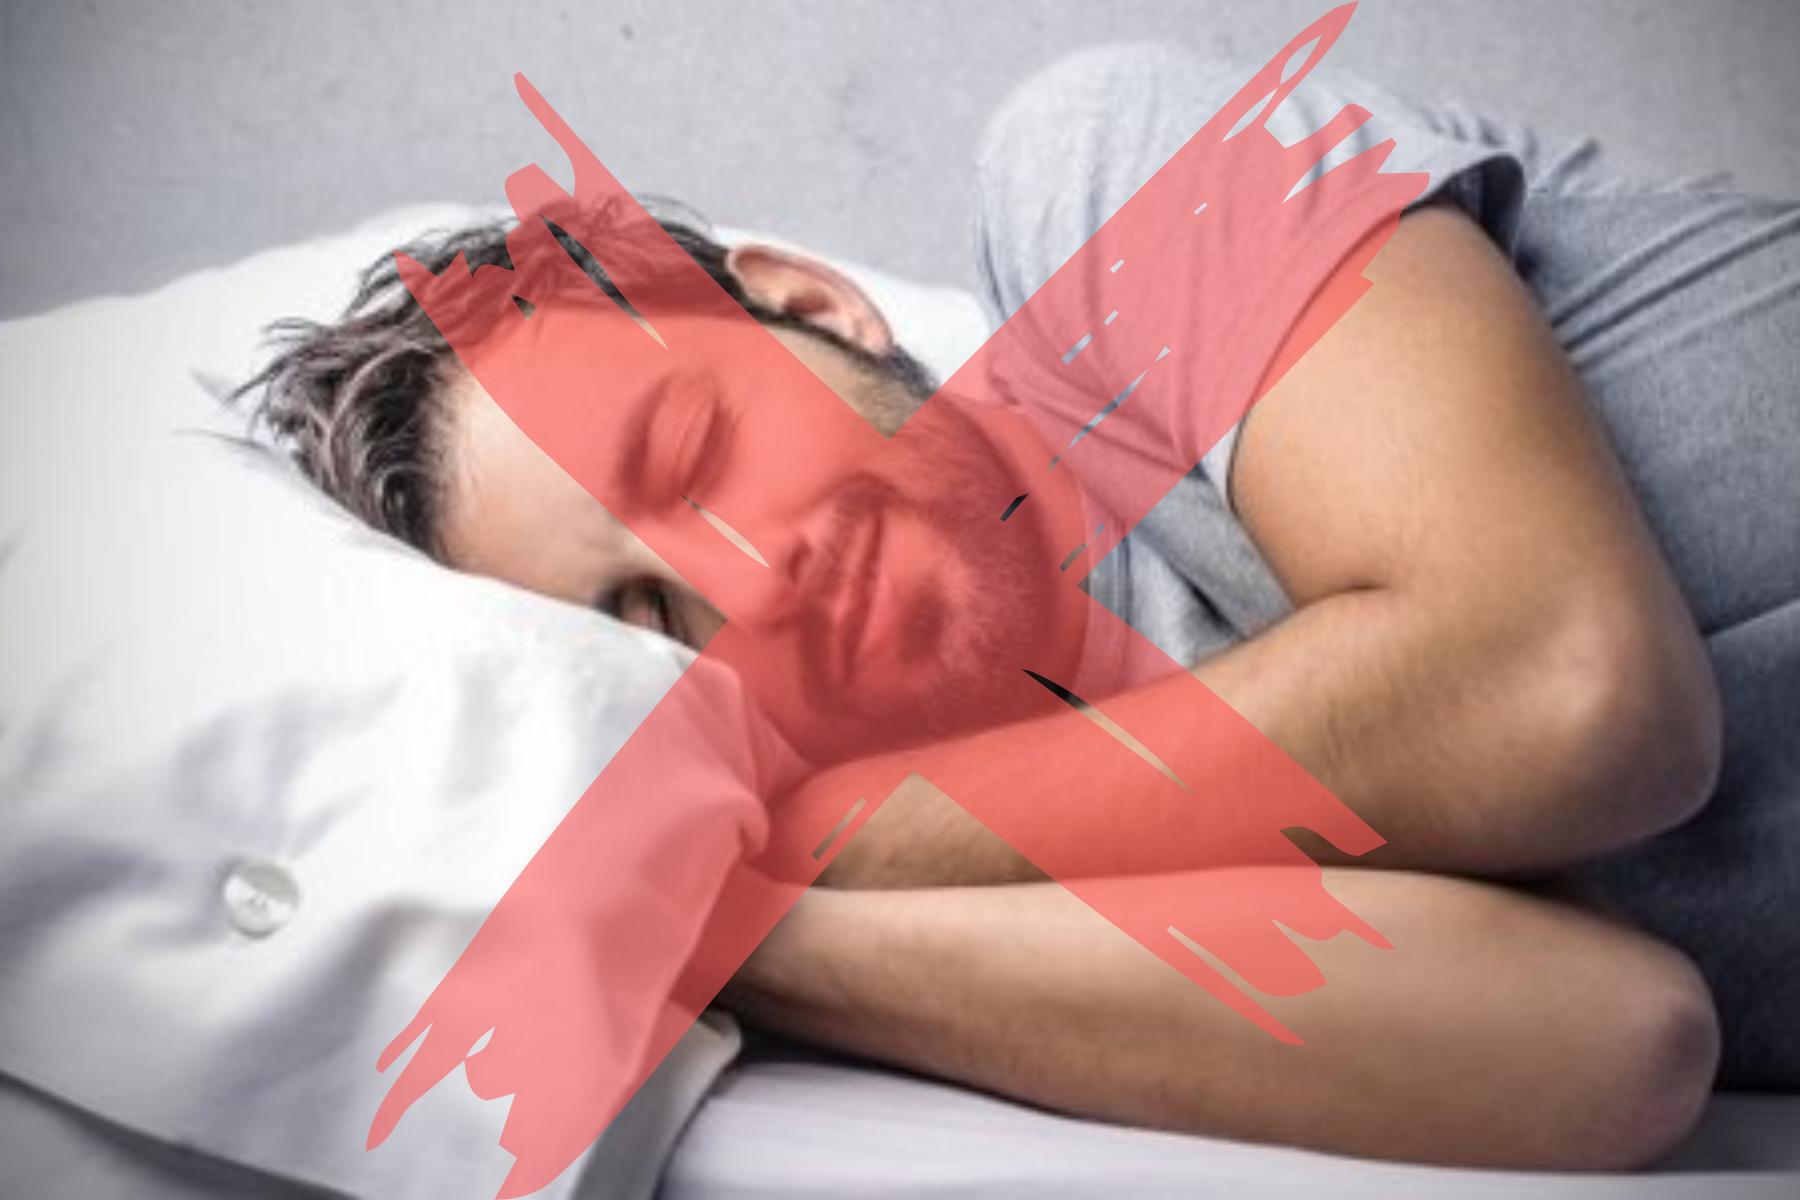 A sleeping man and a large red X sign